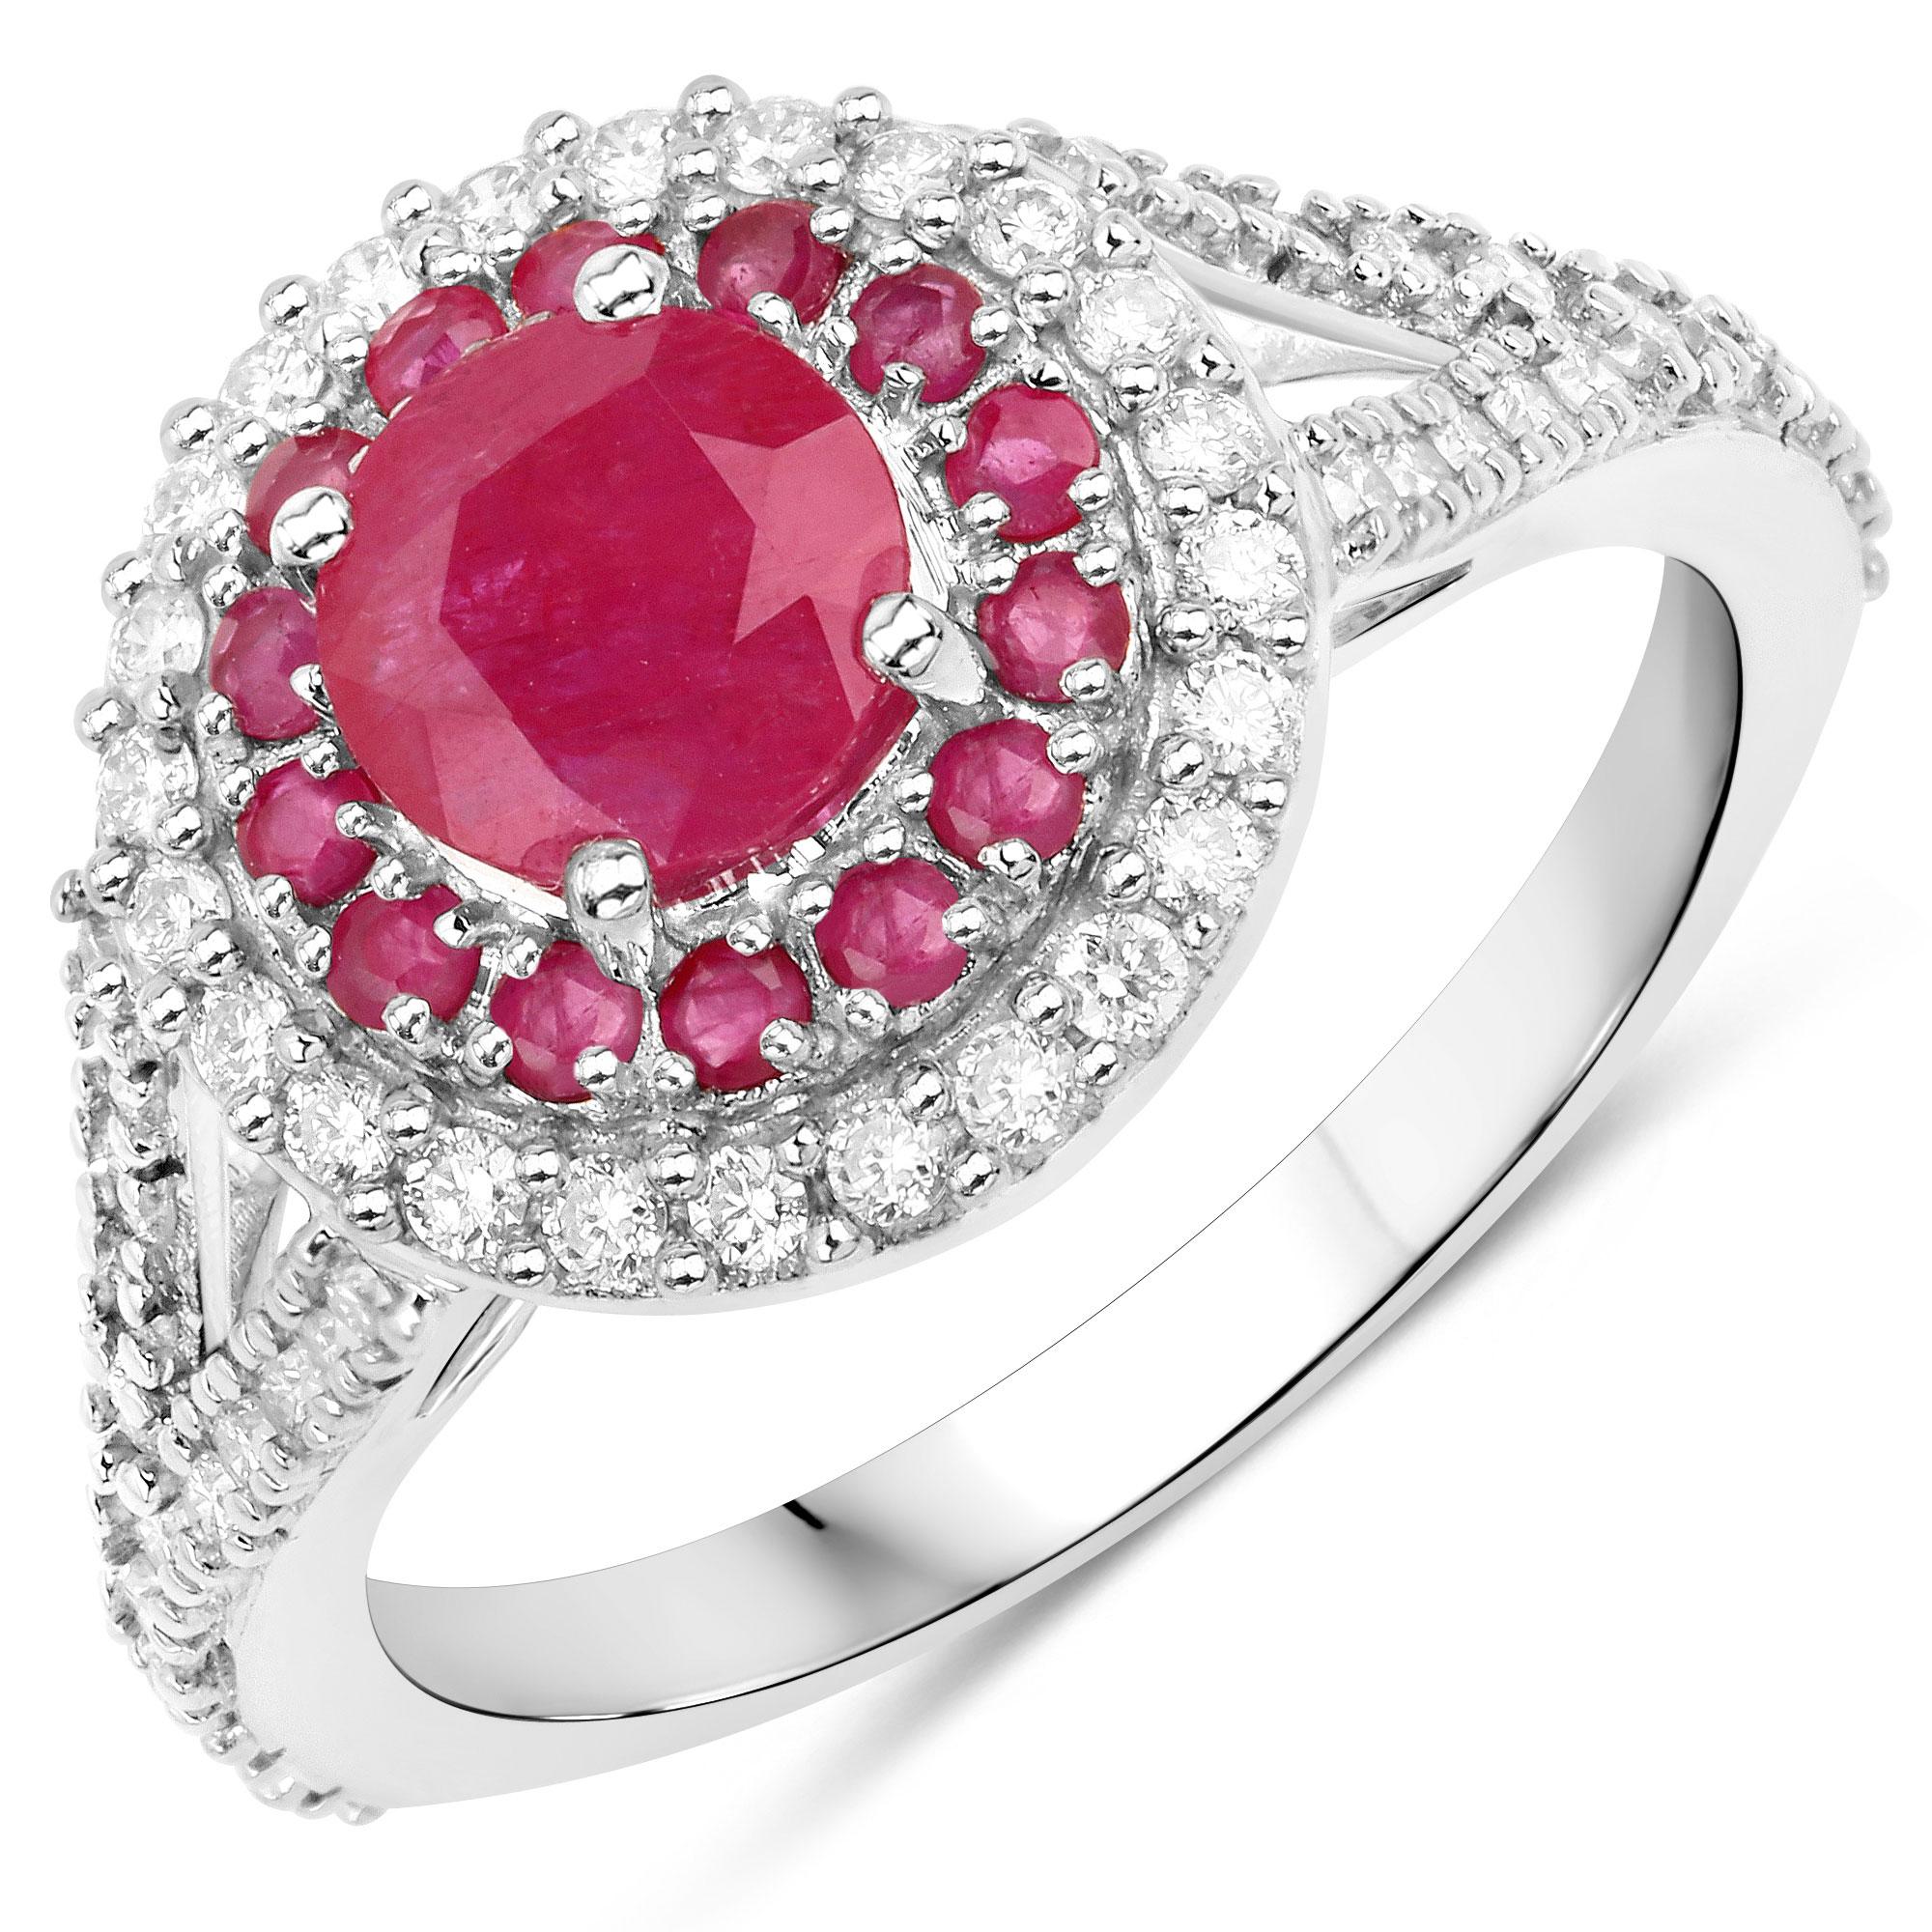 It comes with the appraisal by GIA GG/AJP
All Gemstones are Natural
17 Round Rubies = 1.37 Carat
54 Round Diamonds = 0.58 Carats
Metal: 14K White Gold
Ring Size: 8* US
*It can be resized complimentary